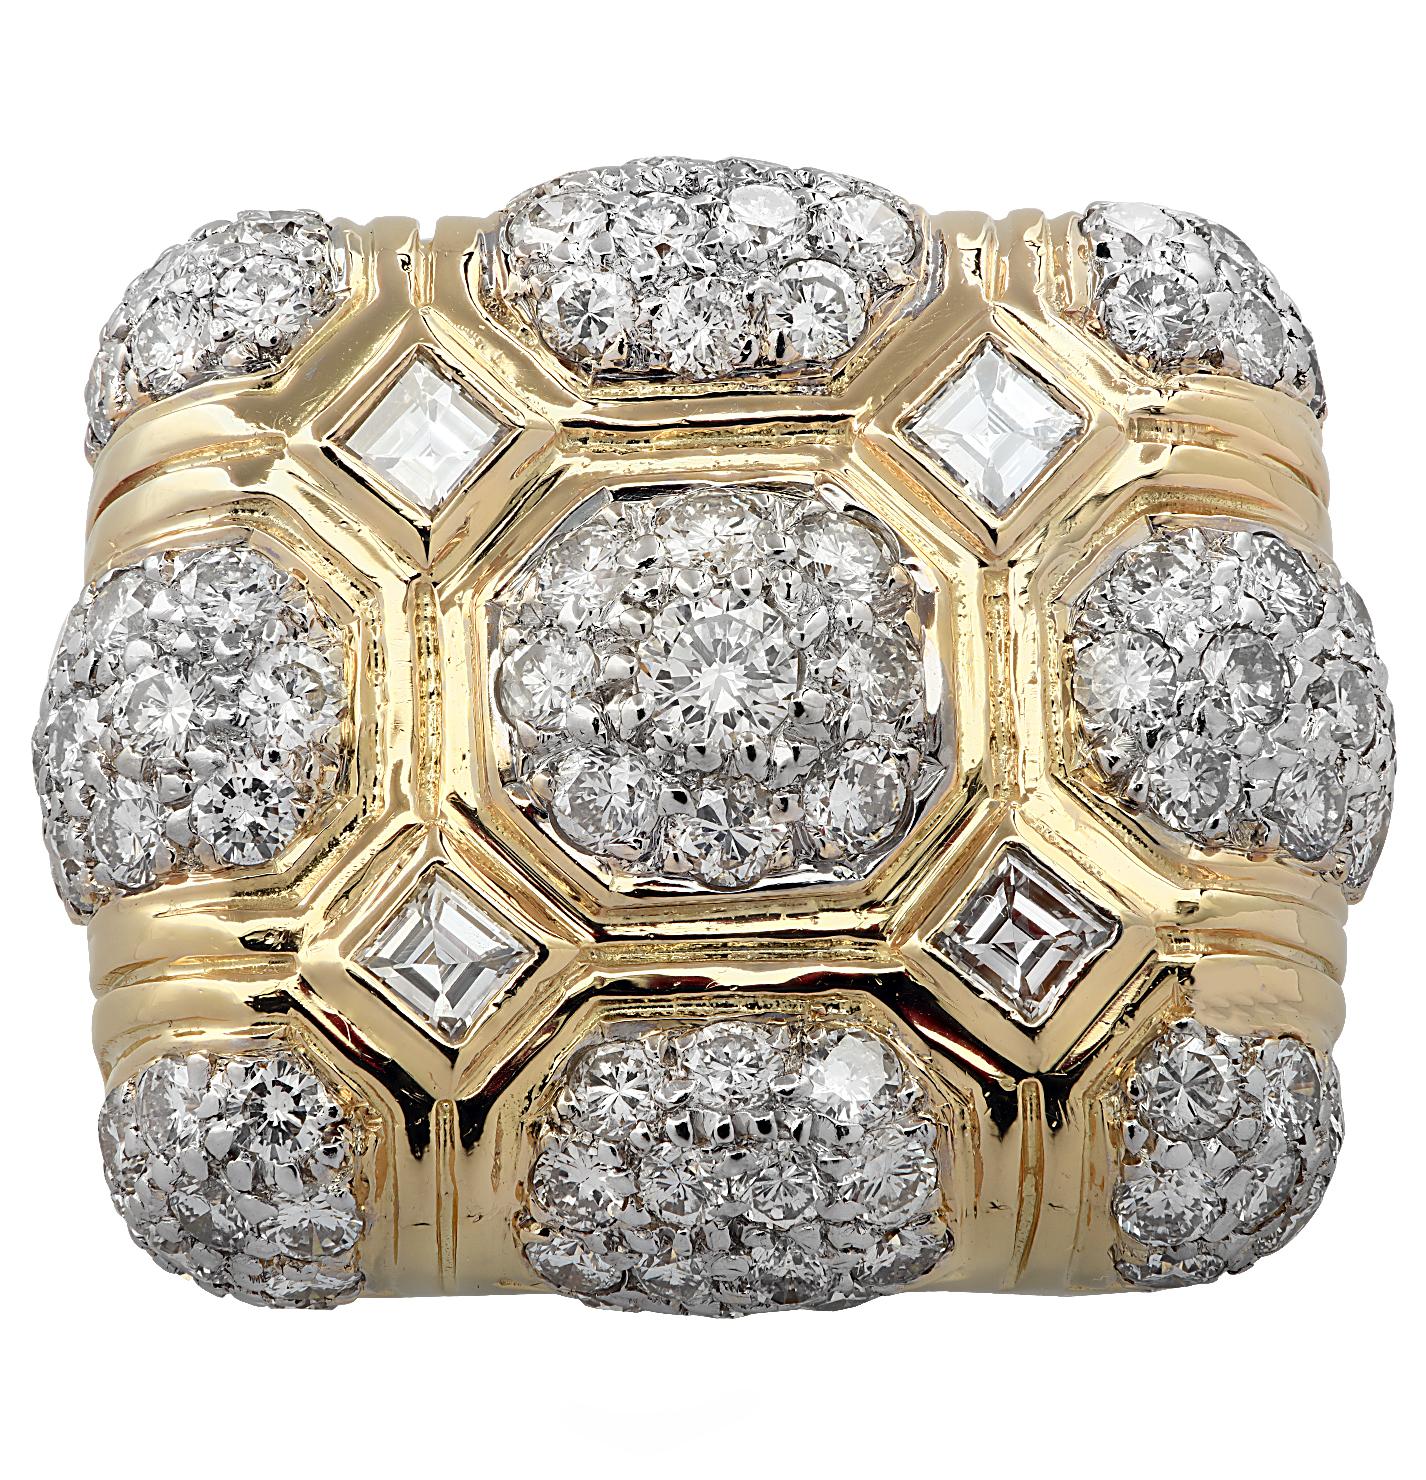  Striking cocktail ring crafted in 18 karat yellow gold featuring 107 round brilliant and asscher cut diamonds weighing approximately 4 carats total, G color, VS-SI clarity. This piece is rich in color with geometric shapes and clean, crisp lines